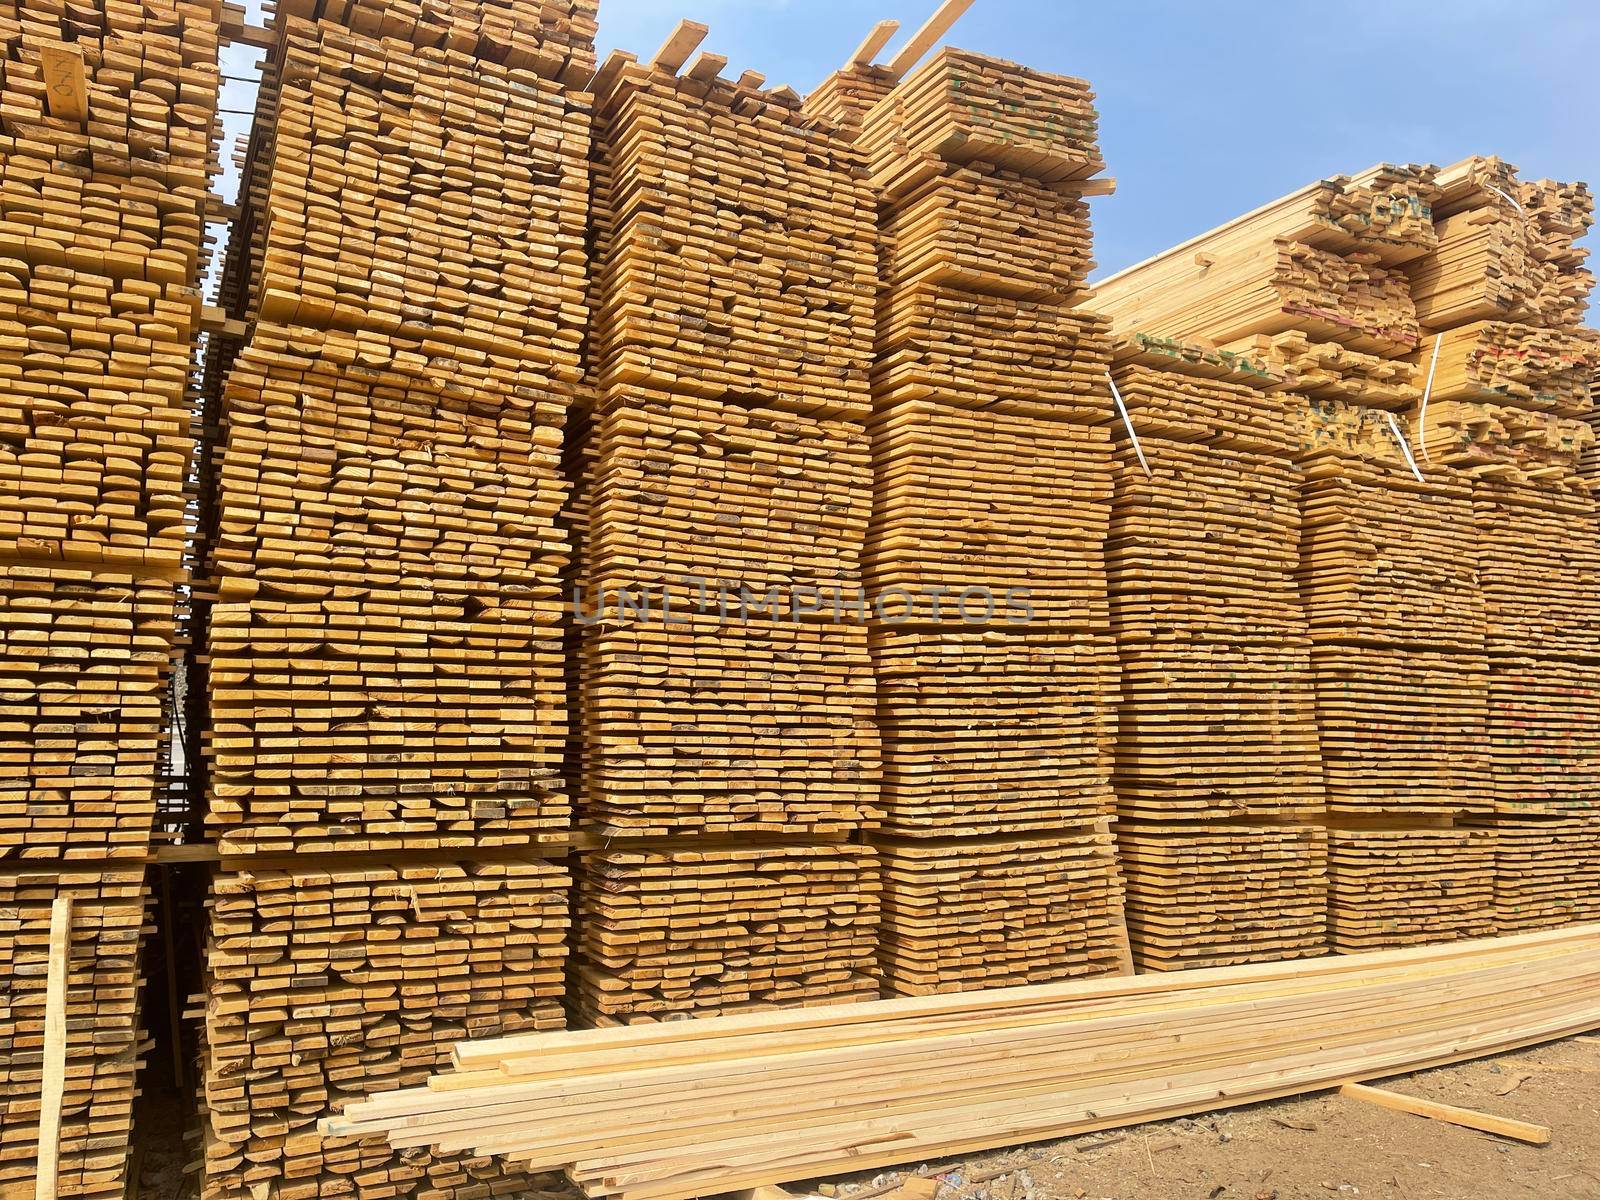 Close up of wooden boards on background of blue sky. Industrial natural timber building materials on building site